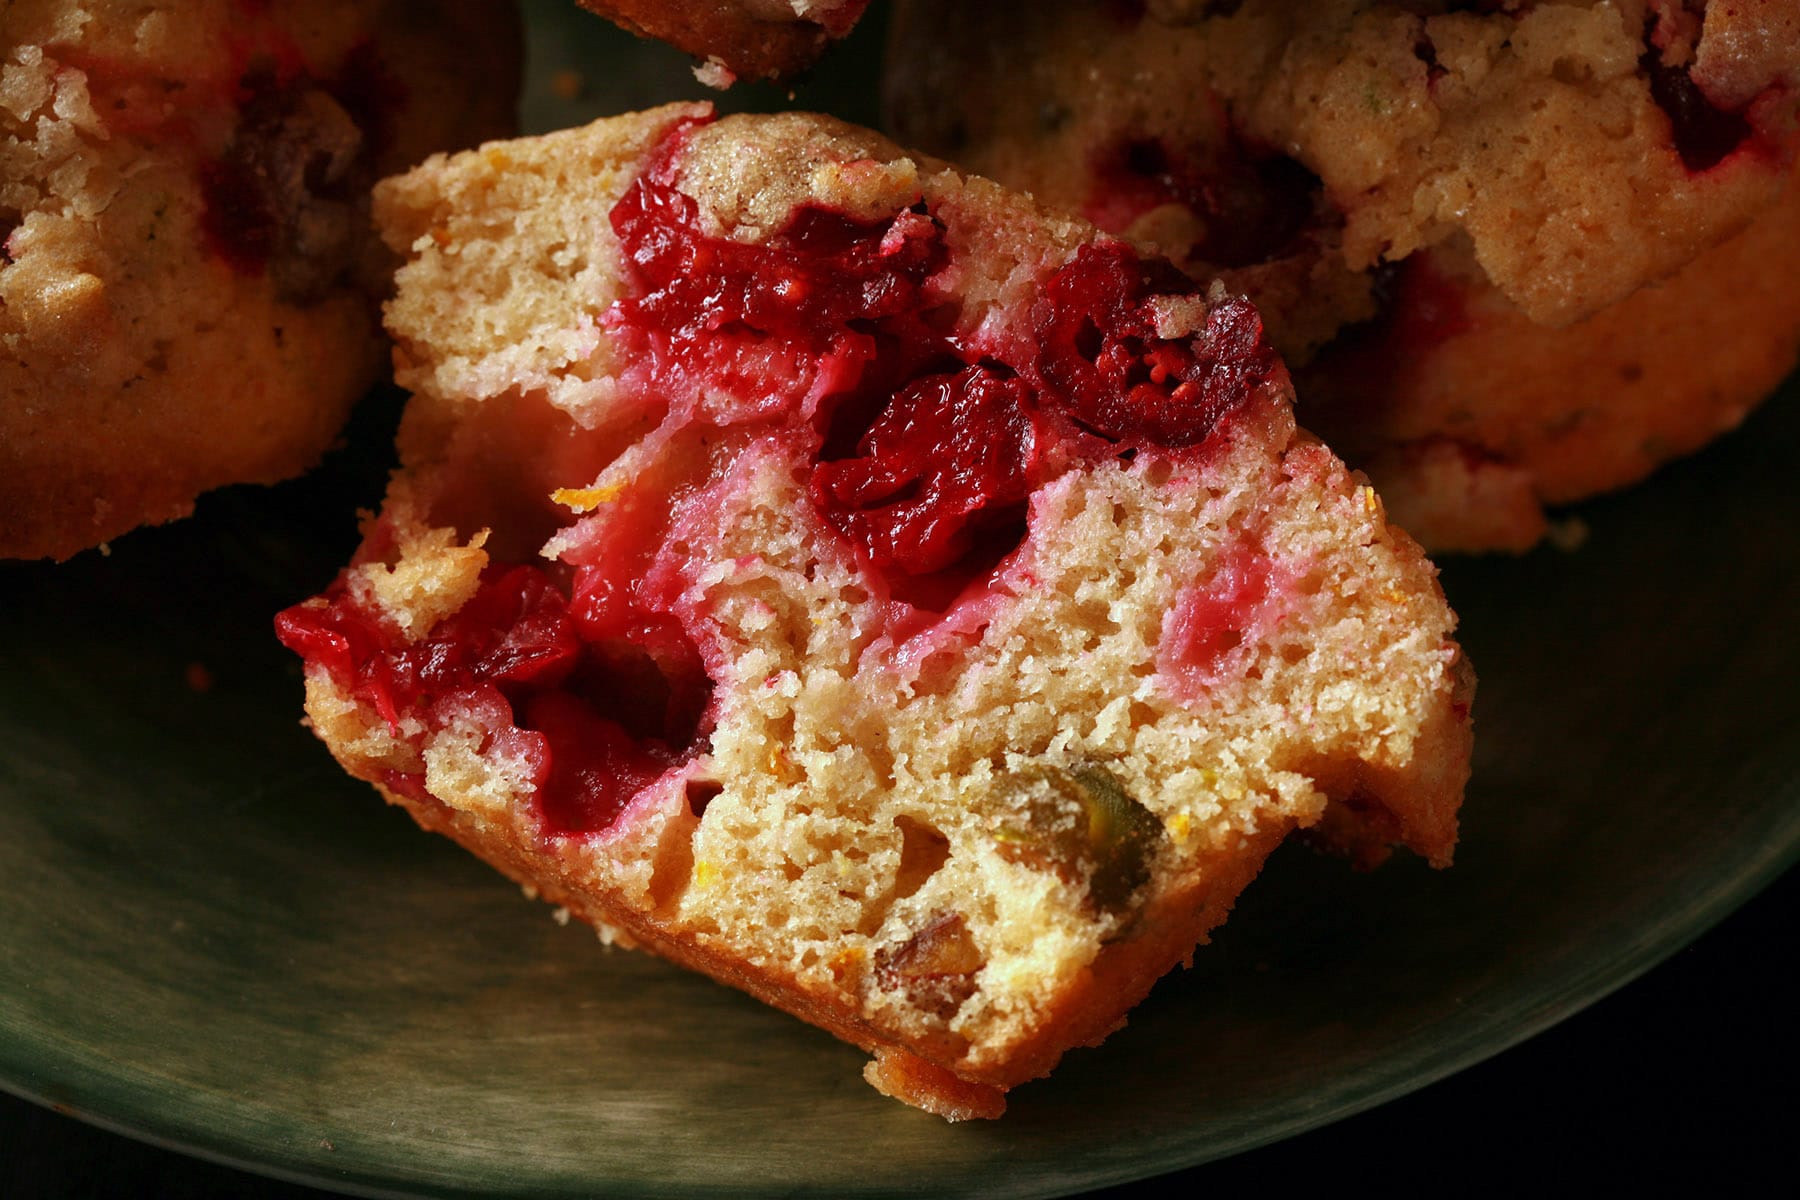 A plate with several cranberry orange pistachio muffins.